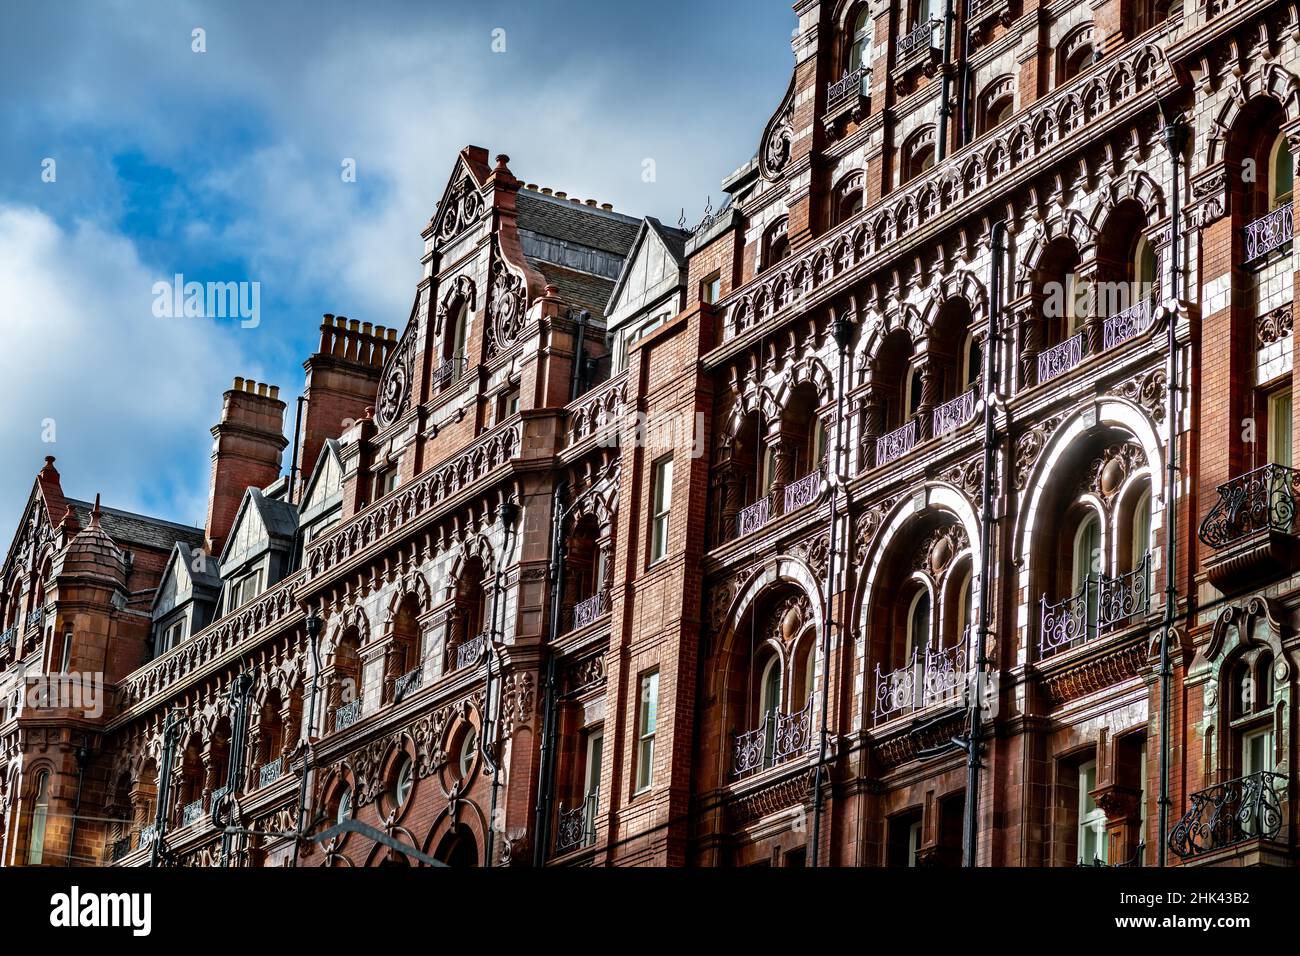 The Midland Hotel, Manchester. Foto Stock